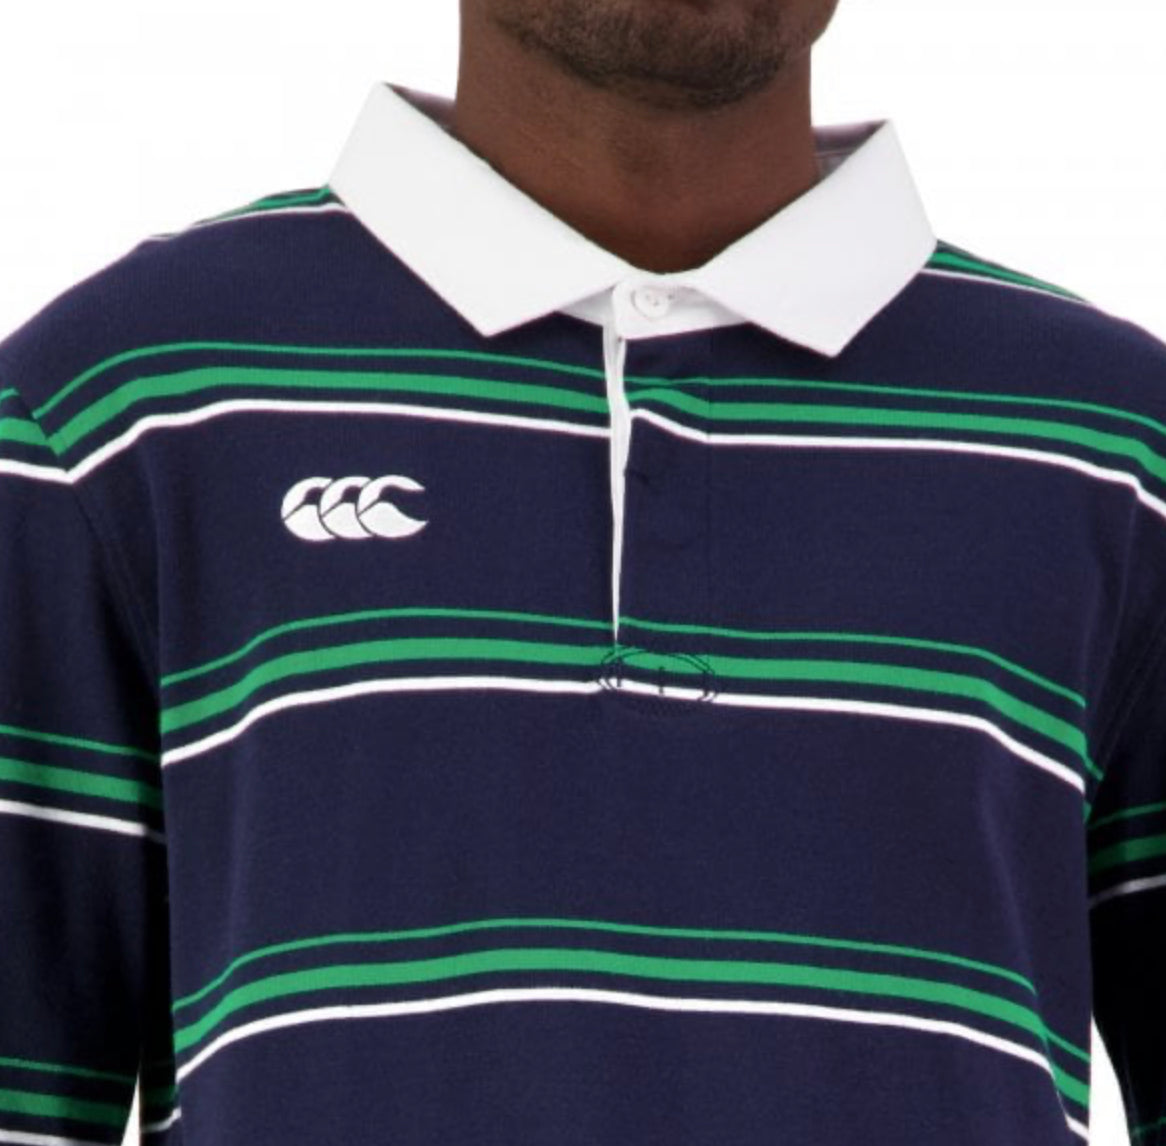 Canterbury Mens Navy Stripe Rugby Jersey.